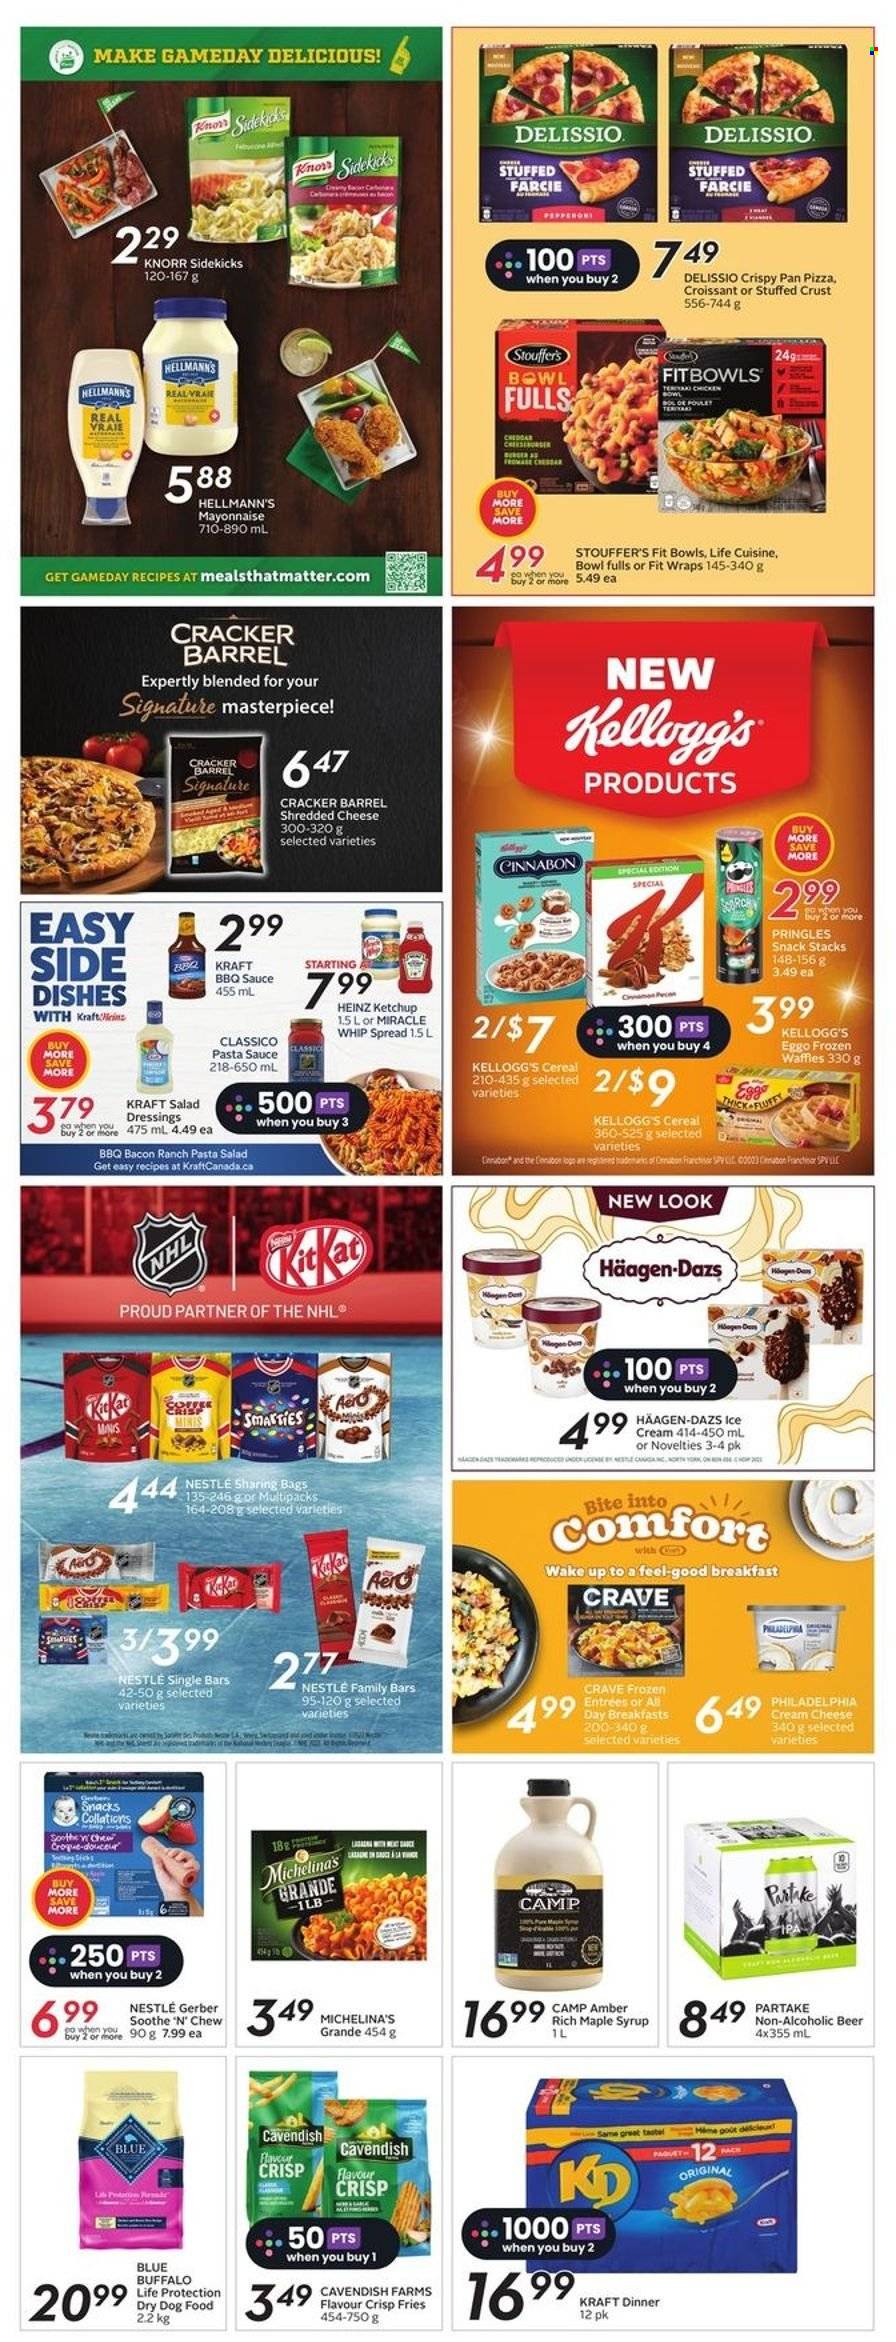 thumbnail - Safeway Flyer - March 16, 2023 - March 22, 2023 - Sales products - wraps, waffles, pizza, pasta sauce, hamburger, sauce, cheeseburger, Kraft®, bacon, pasta salad, shredded cheese, cheddar, cheese, mayonnaise, Miracle Whip, Hellmann’s, ice cream, Häagen-Dazs, Stouffer's, potato fries, snack, KitKat, crackers, Kellogg's, Gerber, Pringles, cereals, BBQ sauce, salad dressing, Classico, maple syrup, syrup, beer, animal food, Blue Buffalo, dog food, dry dog food, Nestlé, Heinz, ketchup, Philadelphia, Knorr, Smarties. Page 18.